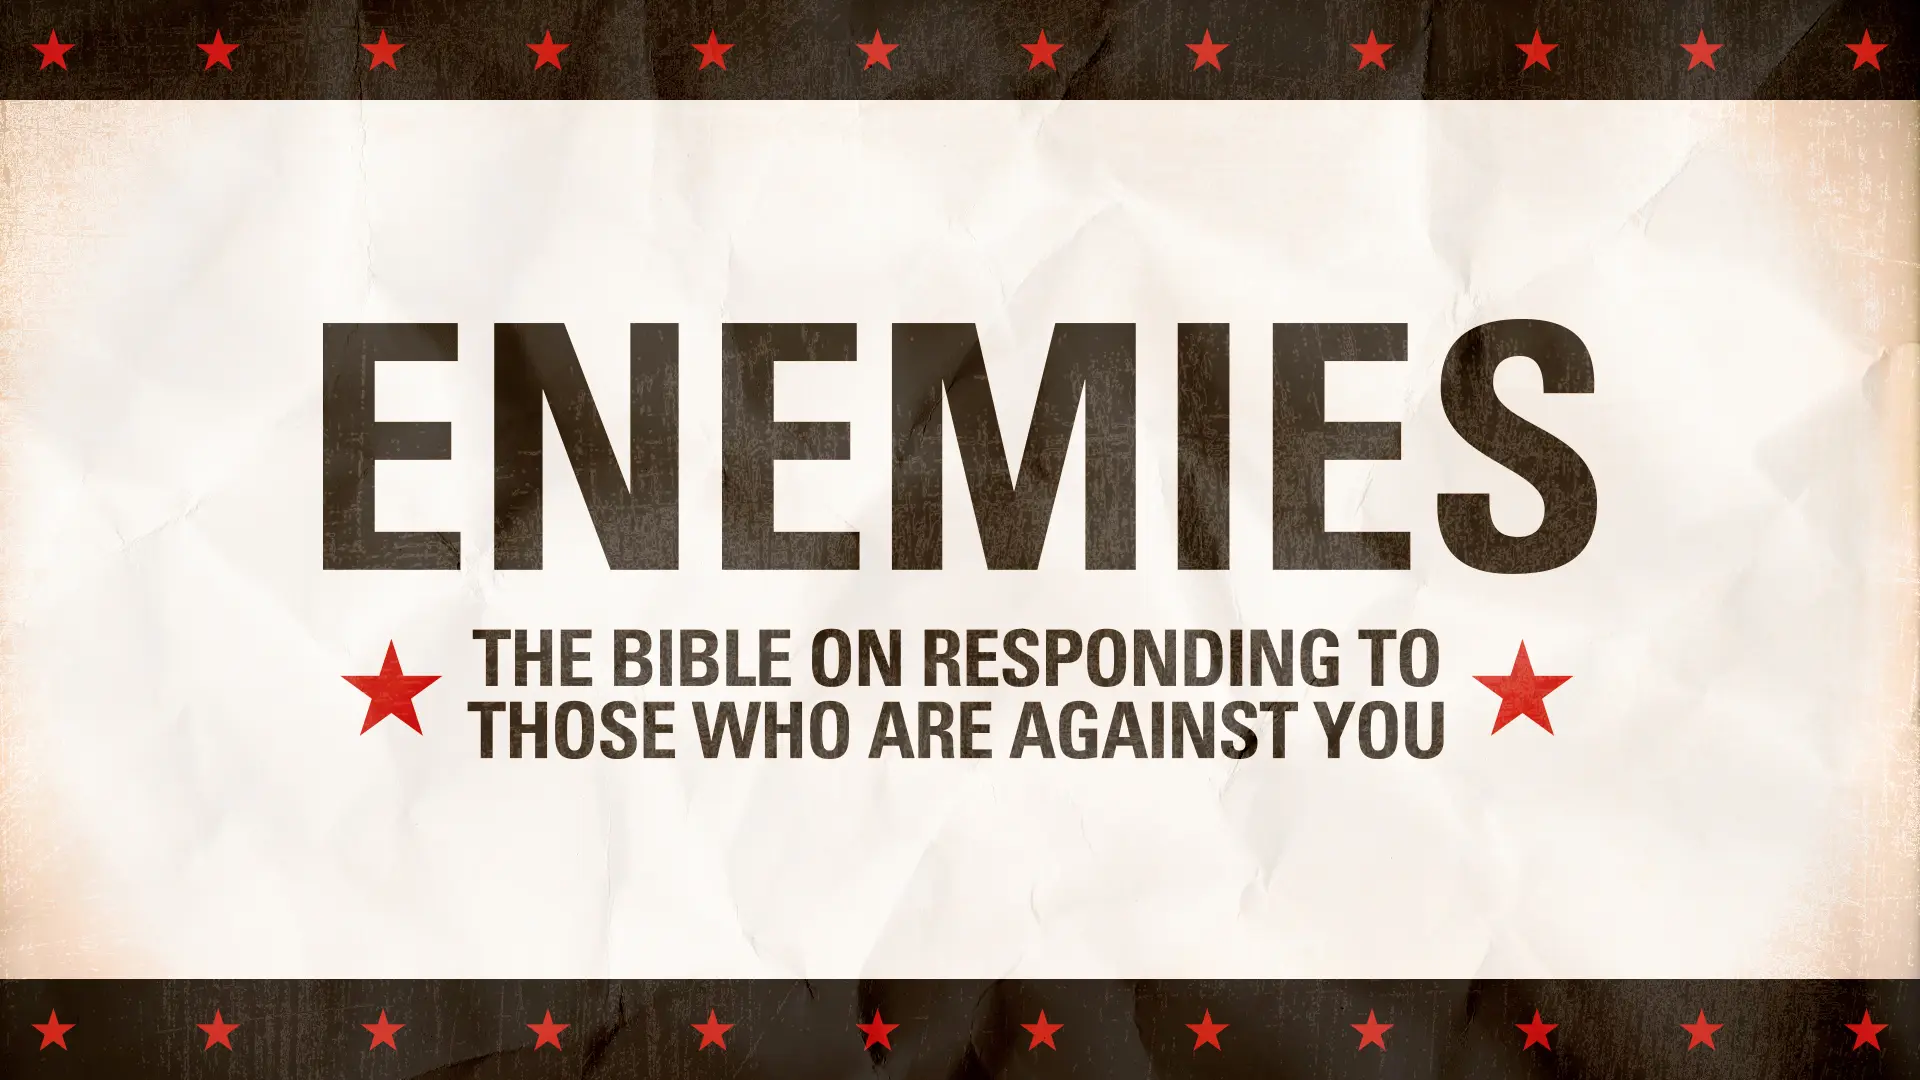 Featured image for “Enemies”